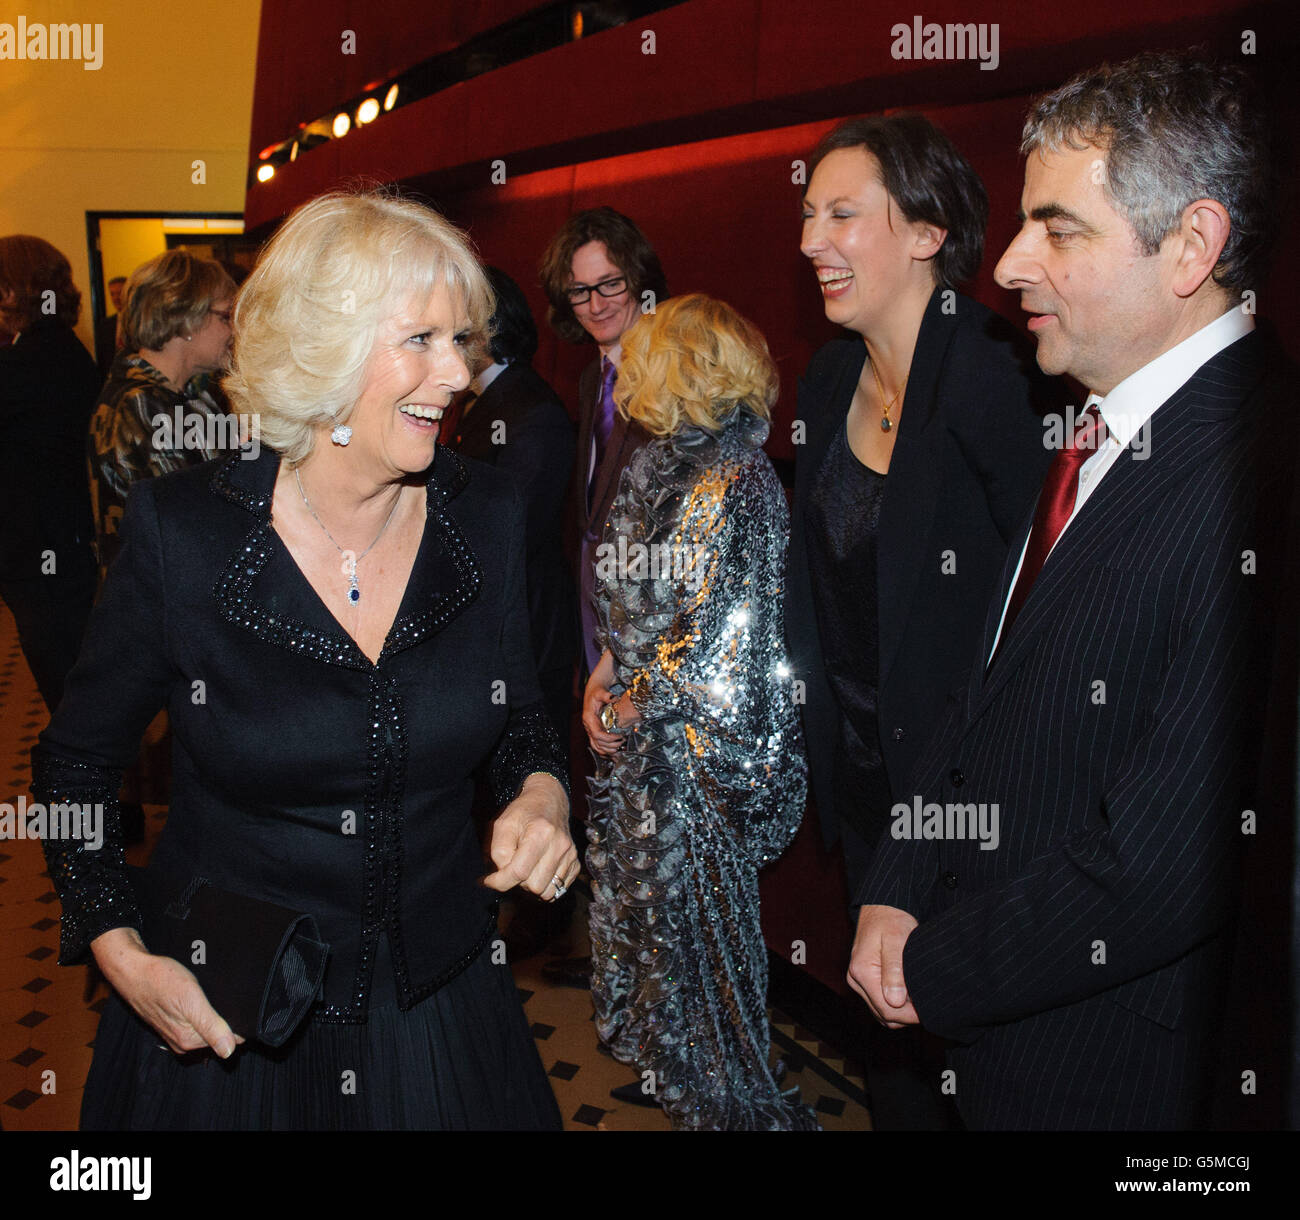 The Duchess of Cornwall meets performers Miranda Hart and Rowan Atkinson at the Prince's Trust Comedy Gala 2012, at the Royal Albert Hall, in central London. Stock Photo